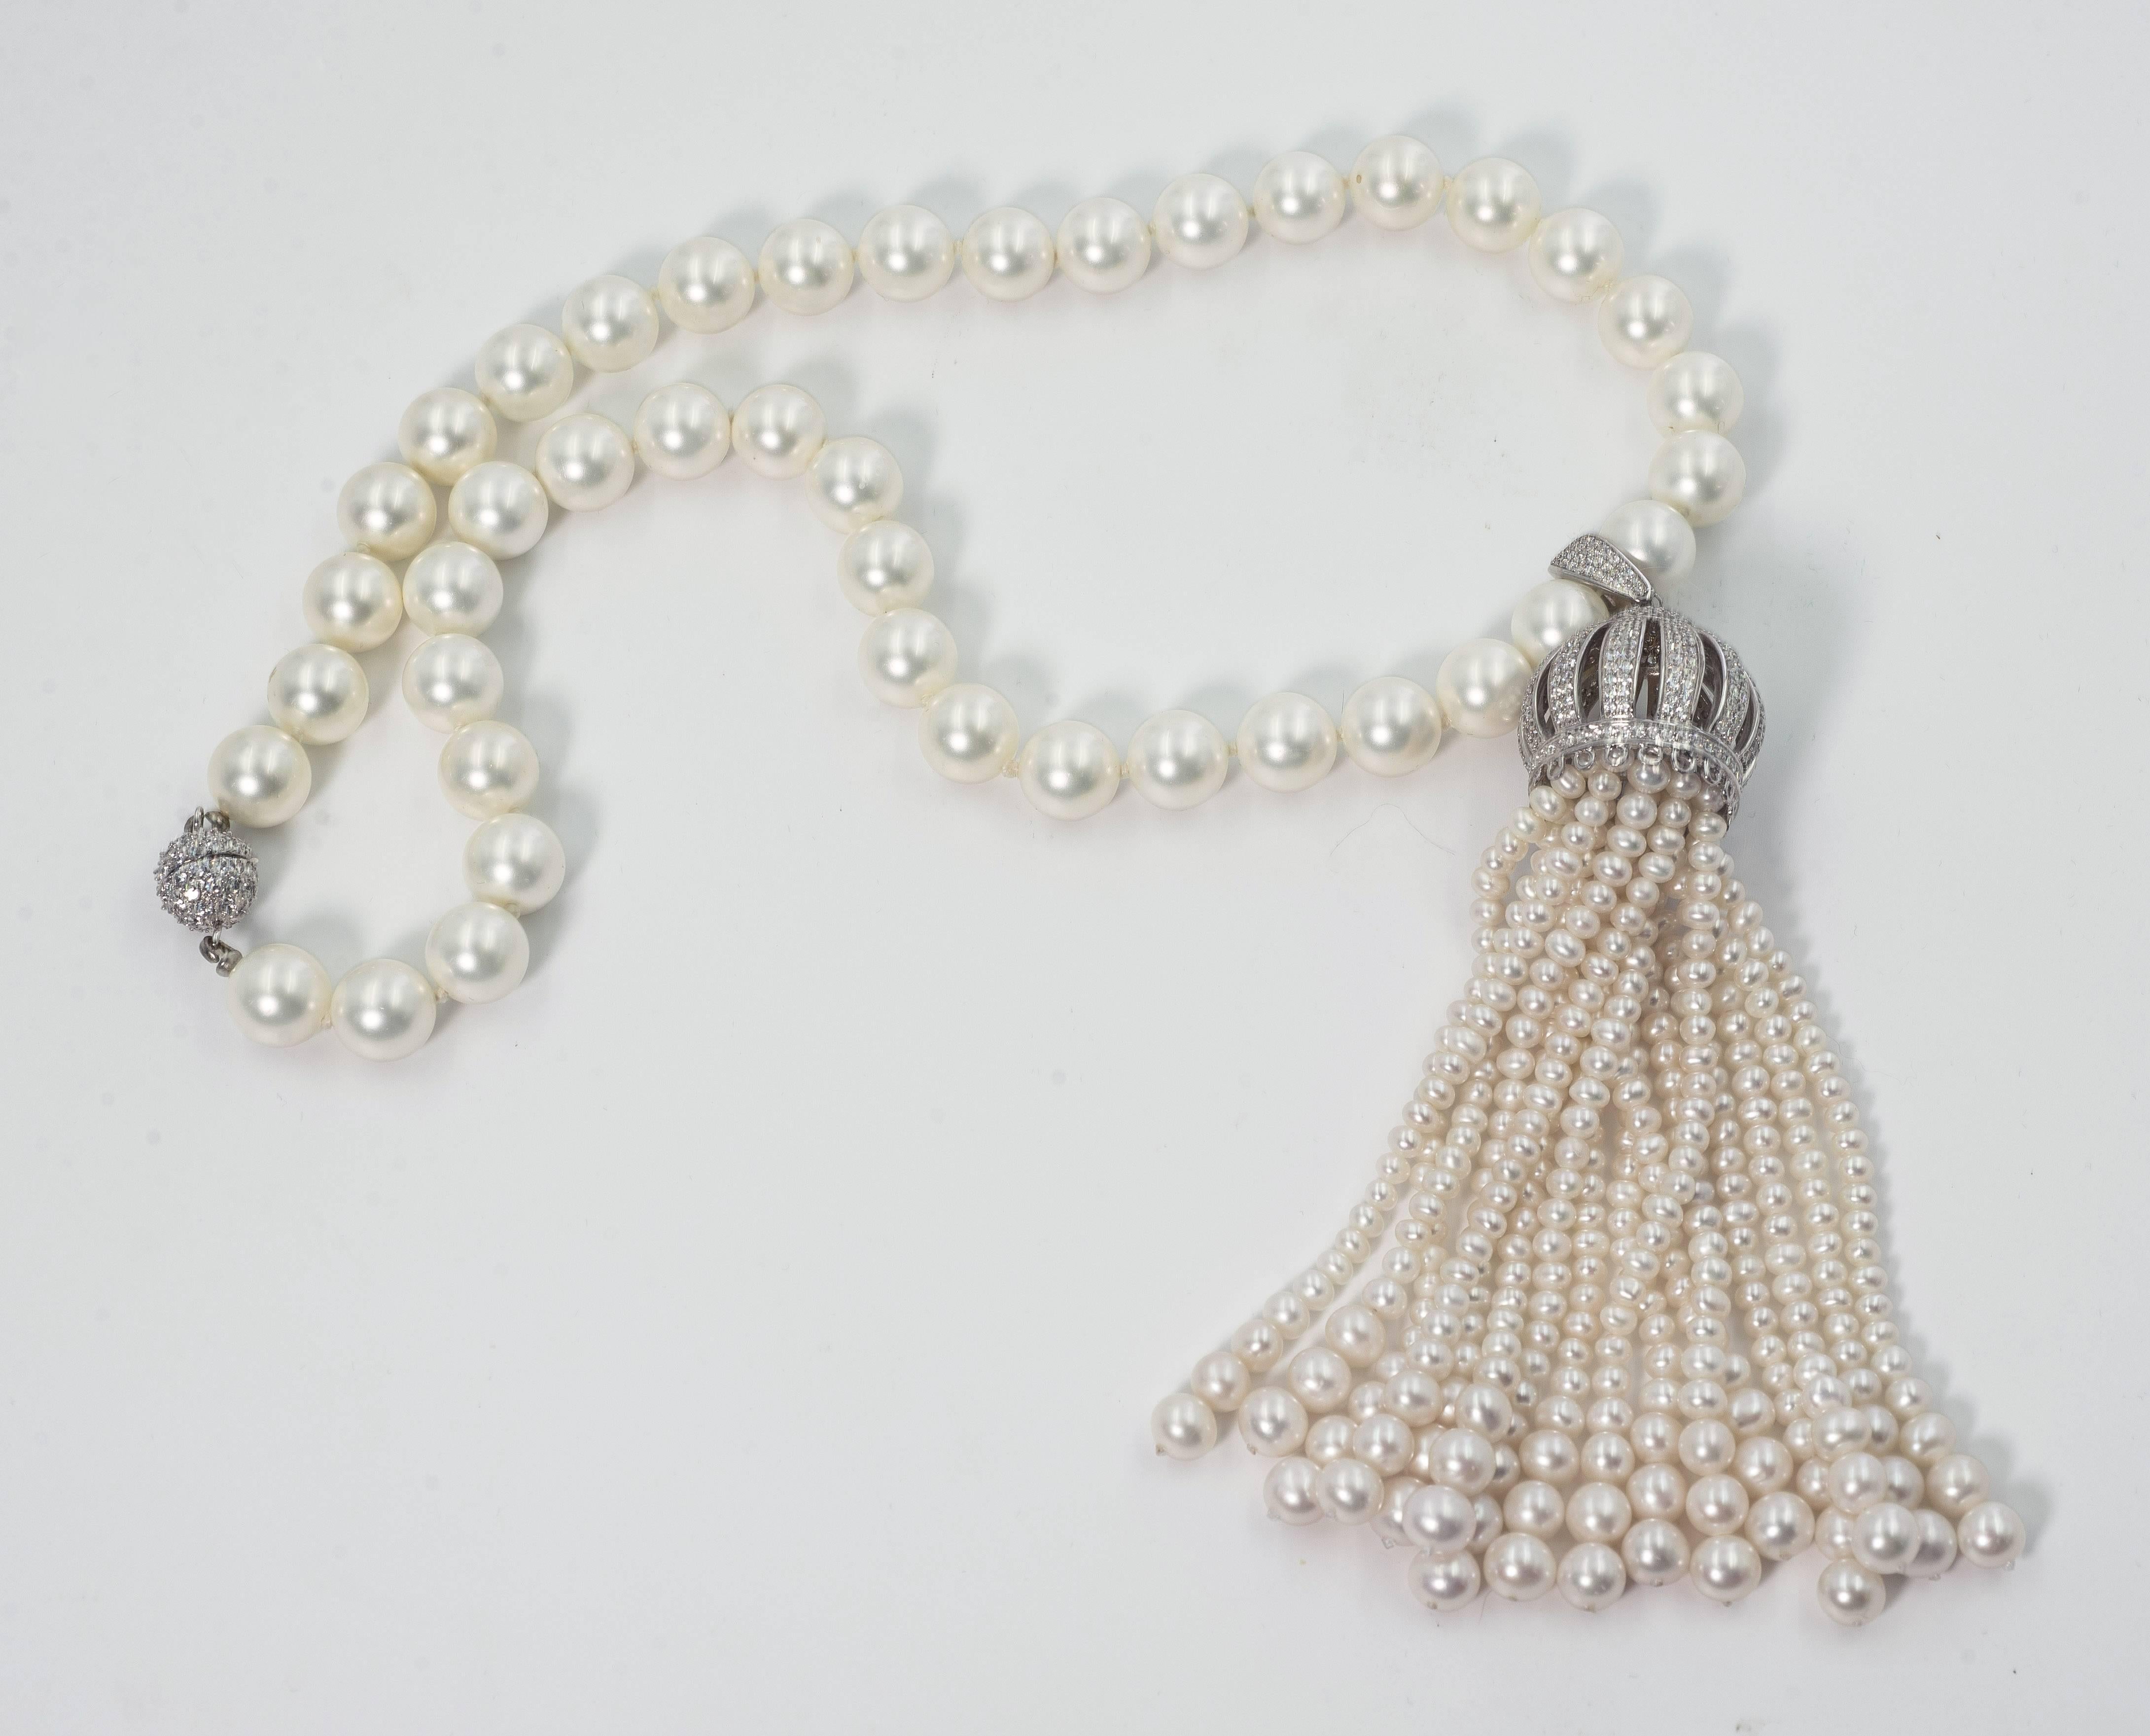 Faux pearl diamond domed tassel necklace of 18'' 10mm pearls suspending a wonderful Edwardian style micro-set pave cubic zircon domed graduated pearl tassel measures 4''. Pave ball clasp. The tassel is detachable which is really wonderful.